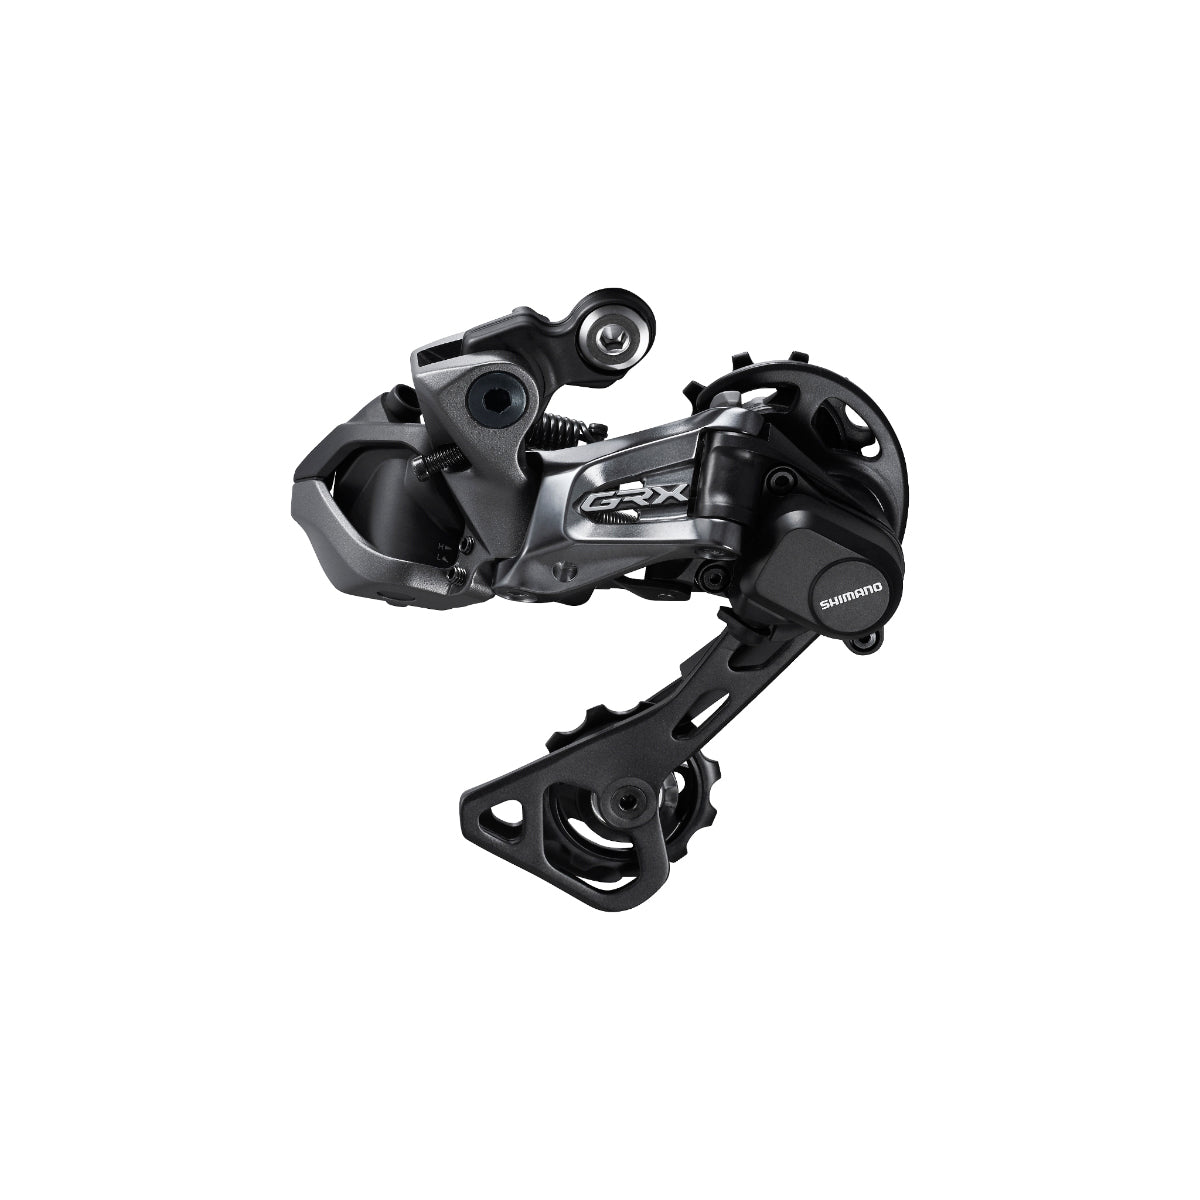 Shimano - GRX DI2 Rear Derailleur 11-speed (42T max low sprocket) -  Veloholic Cycles